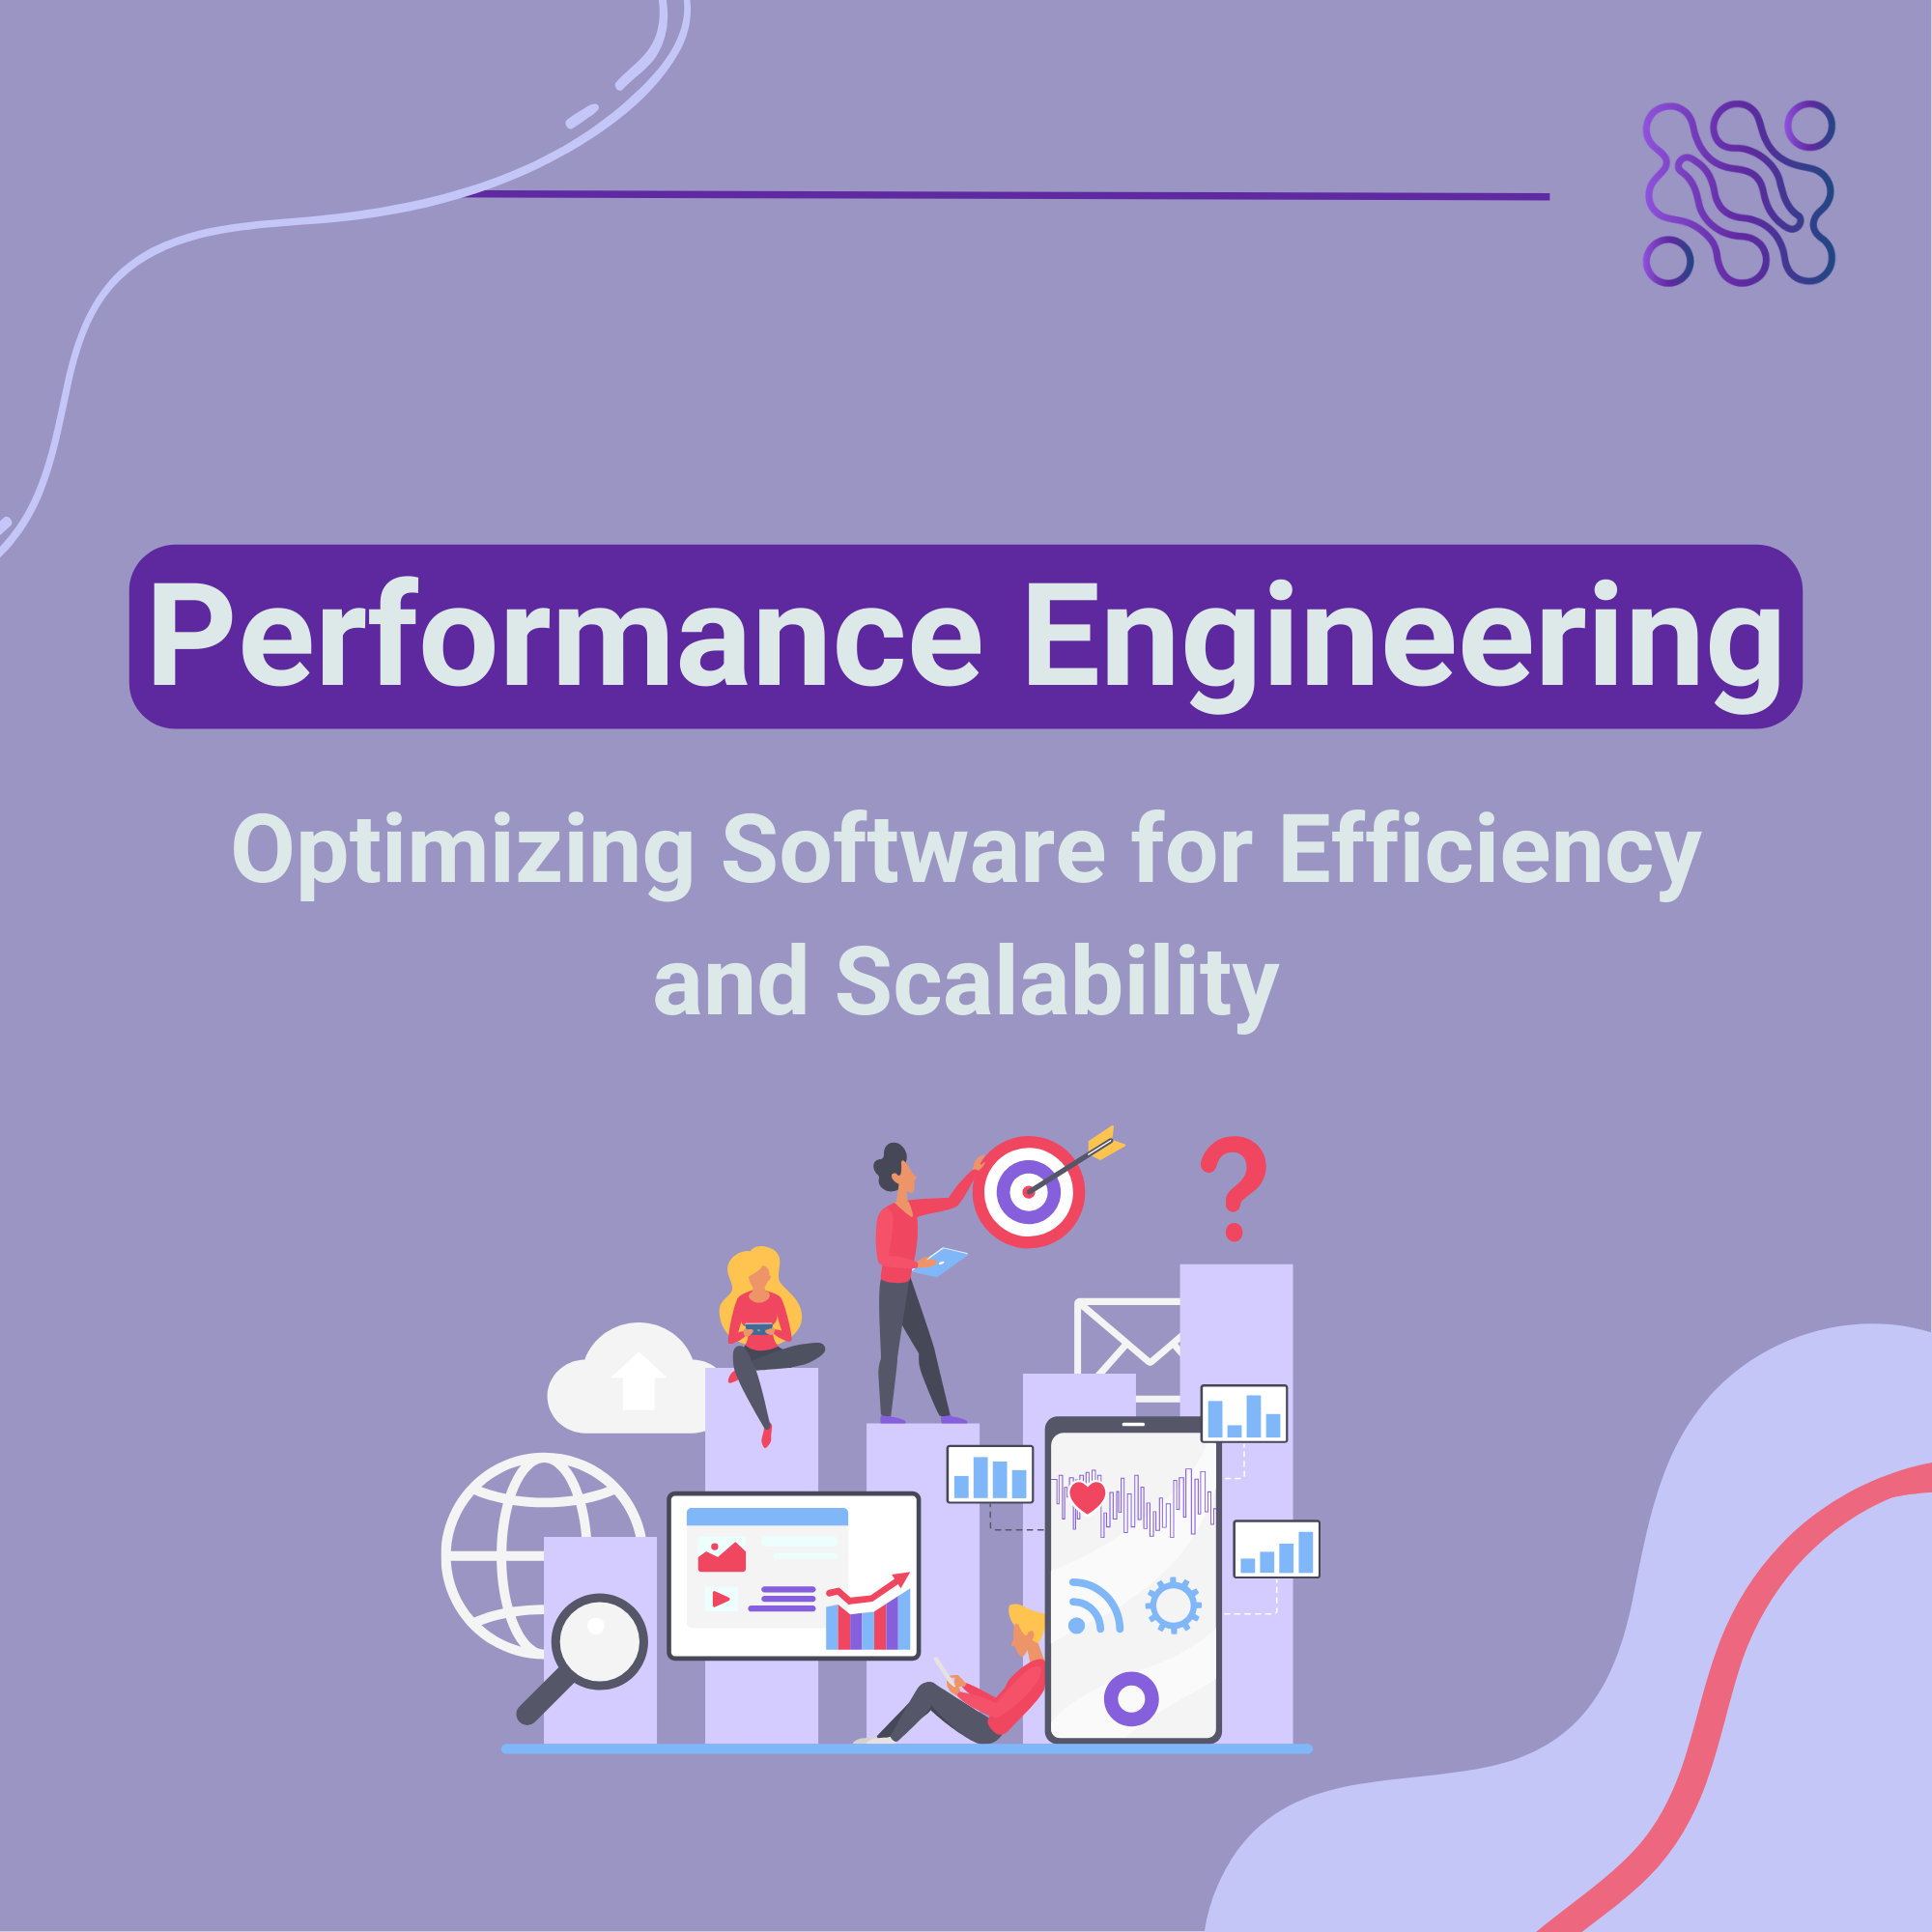 Performance Engineering Optimizing Software for Efficiency and Scalability